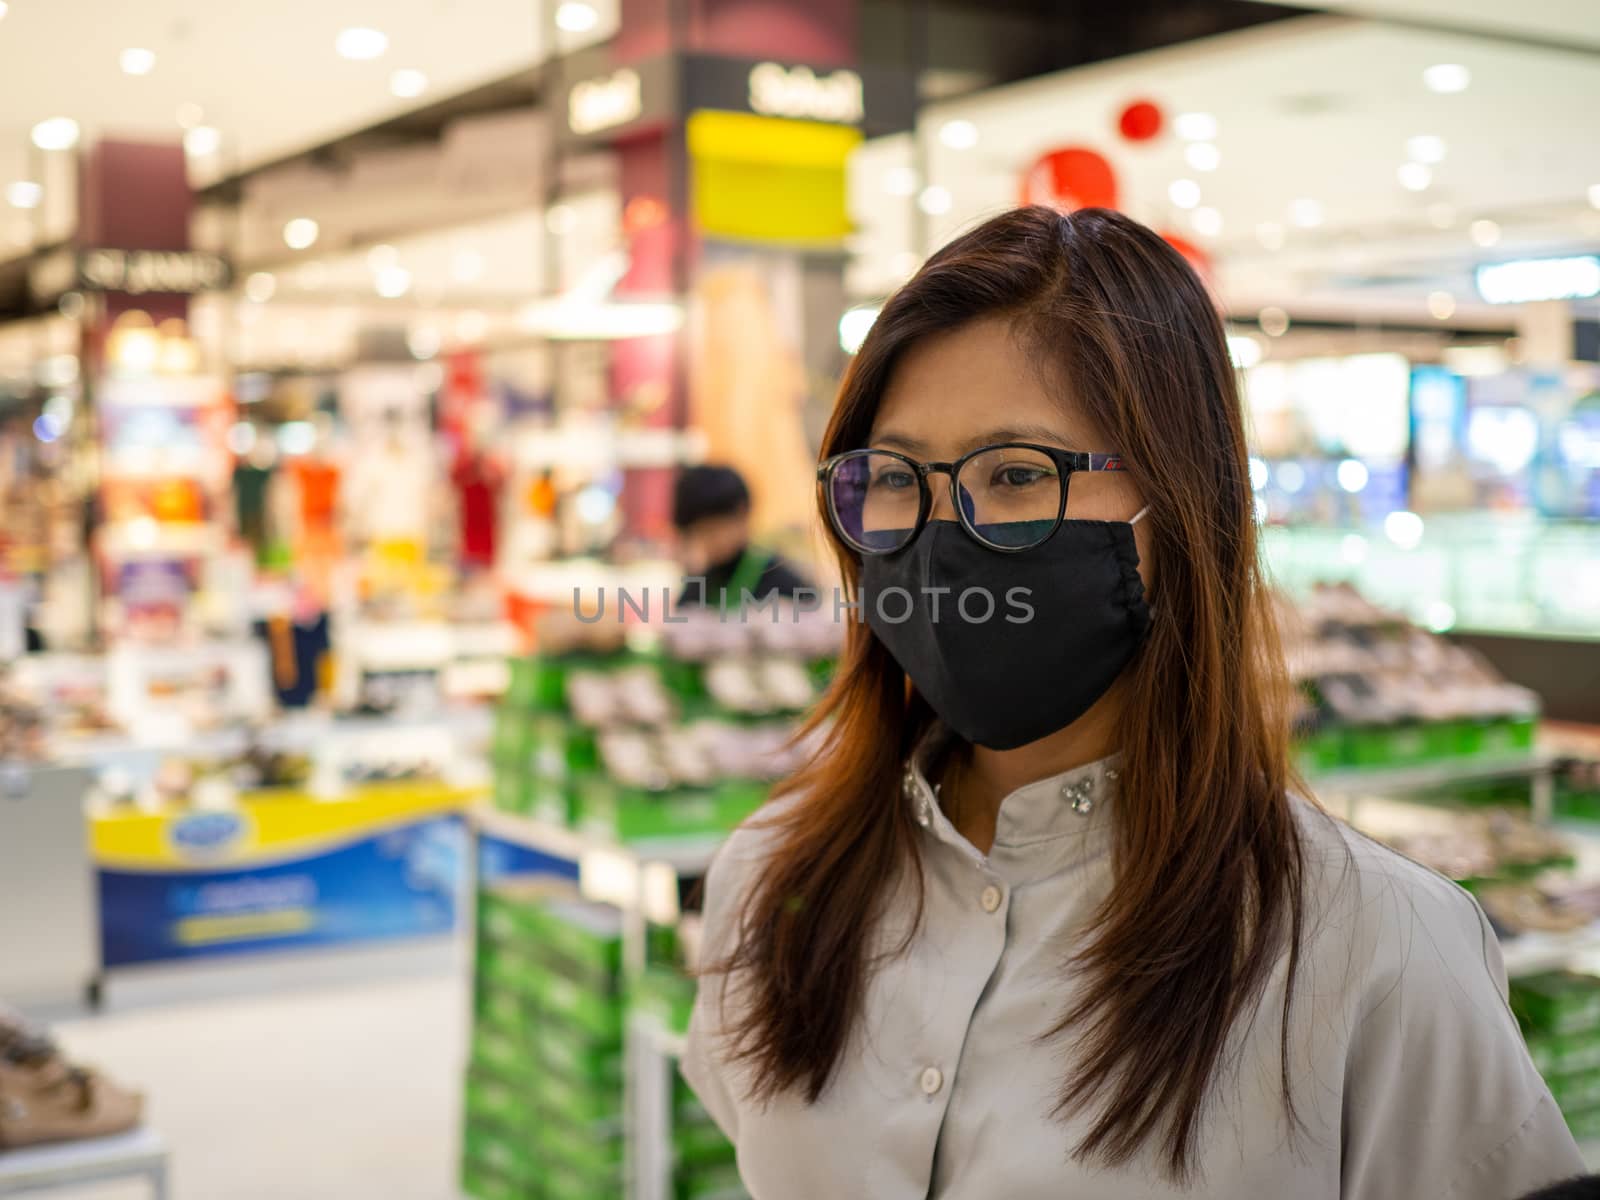 .Portrait of a woman wearing a protective mask Walk in shopping  by Unimages2527